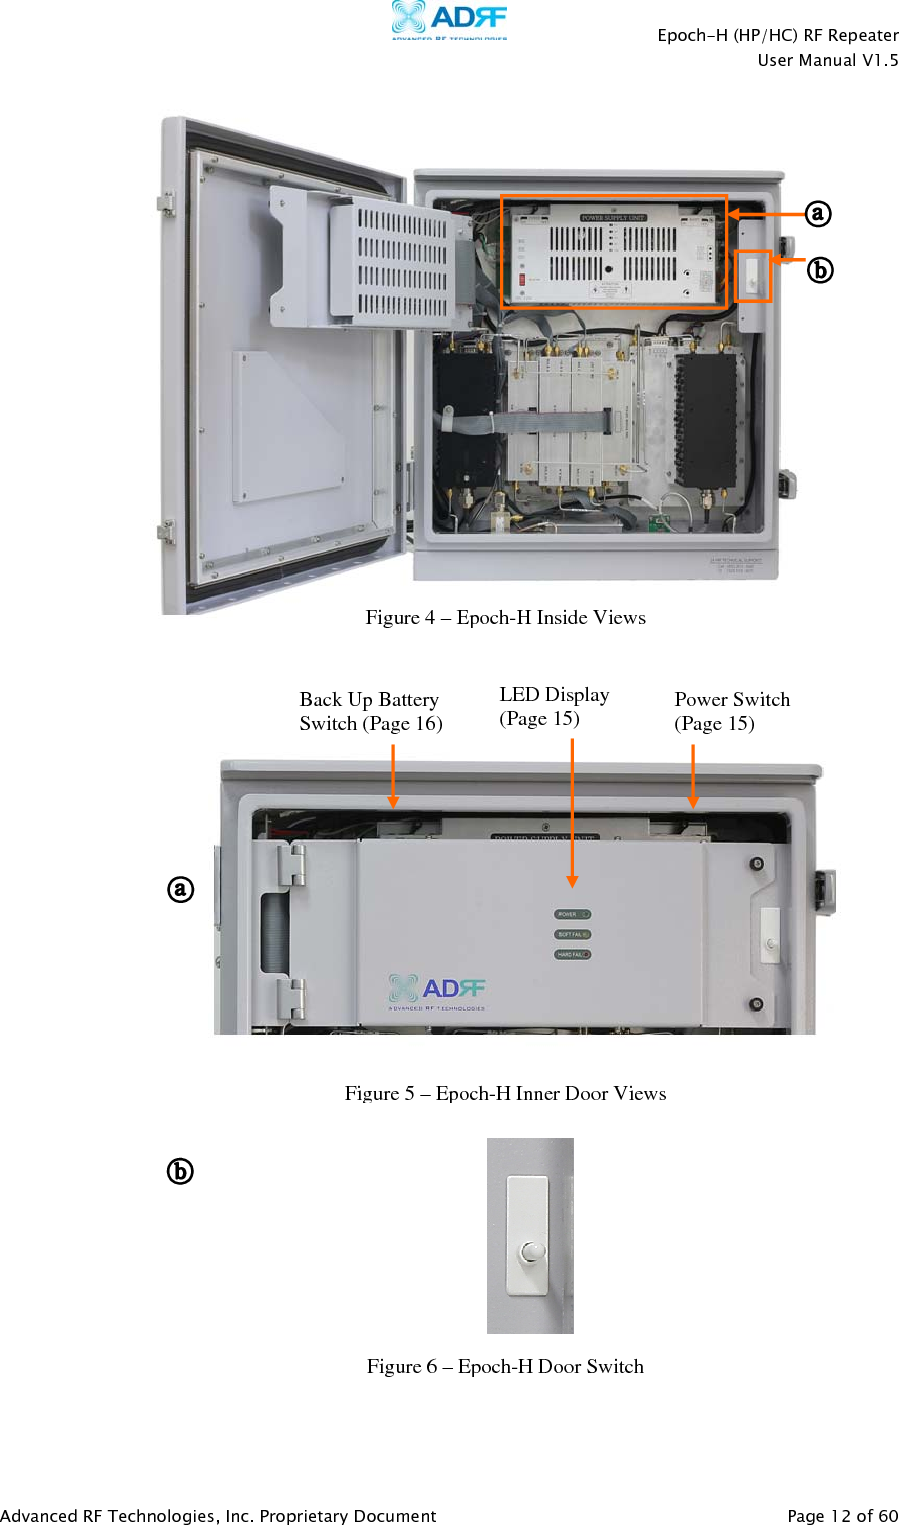    Epoch-H (HP/HC) RF Repeater  User Manual V1.5  Advanced RF Technologies, Inc. Proprietary Document   Page 12 of 60                                                                      Power Switch (Page 15) Back Up Battery Switch (Page 16)LED Display (Page 15) Figure 5–Epoch-H Inner Door ViewsFigure 4–Epoch-H Inside ViewsFigure 6–Epoch-H Door Switch